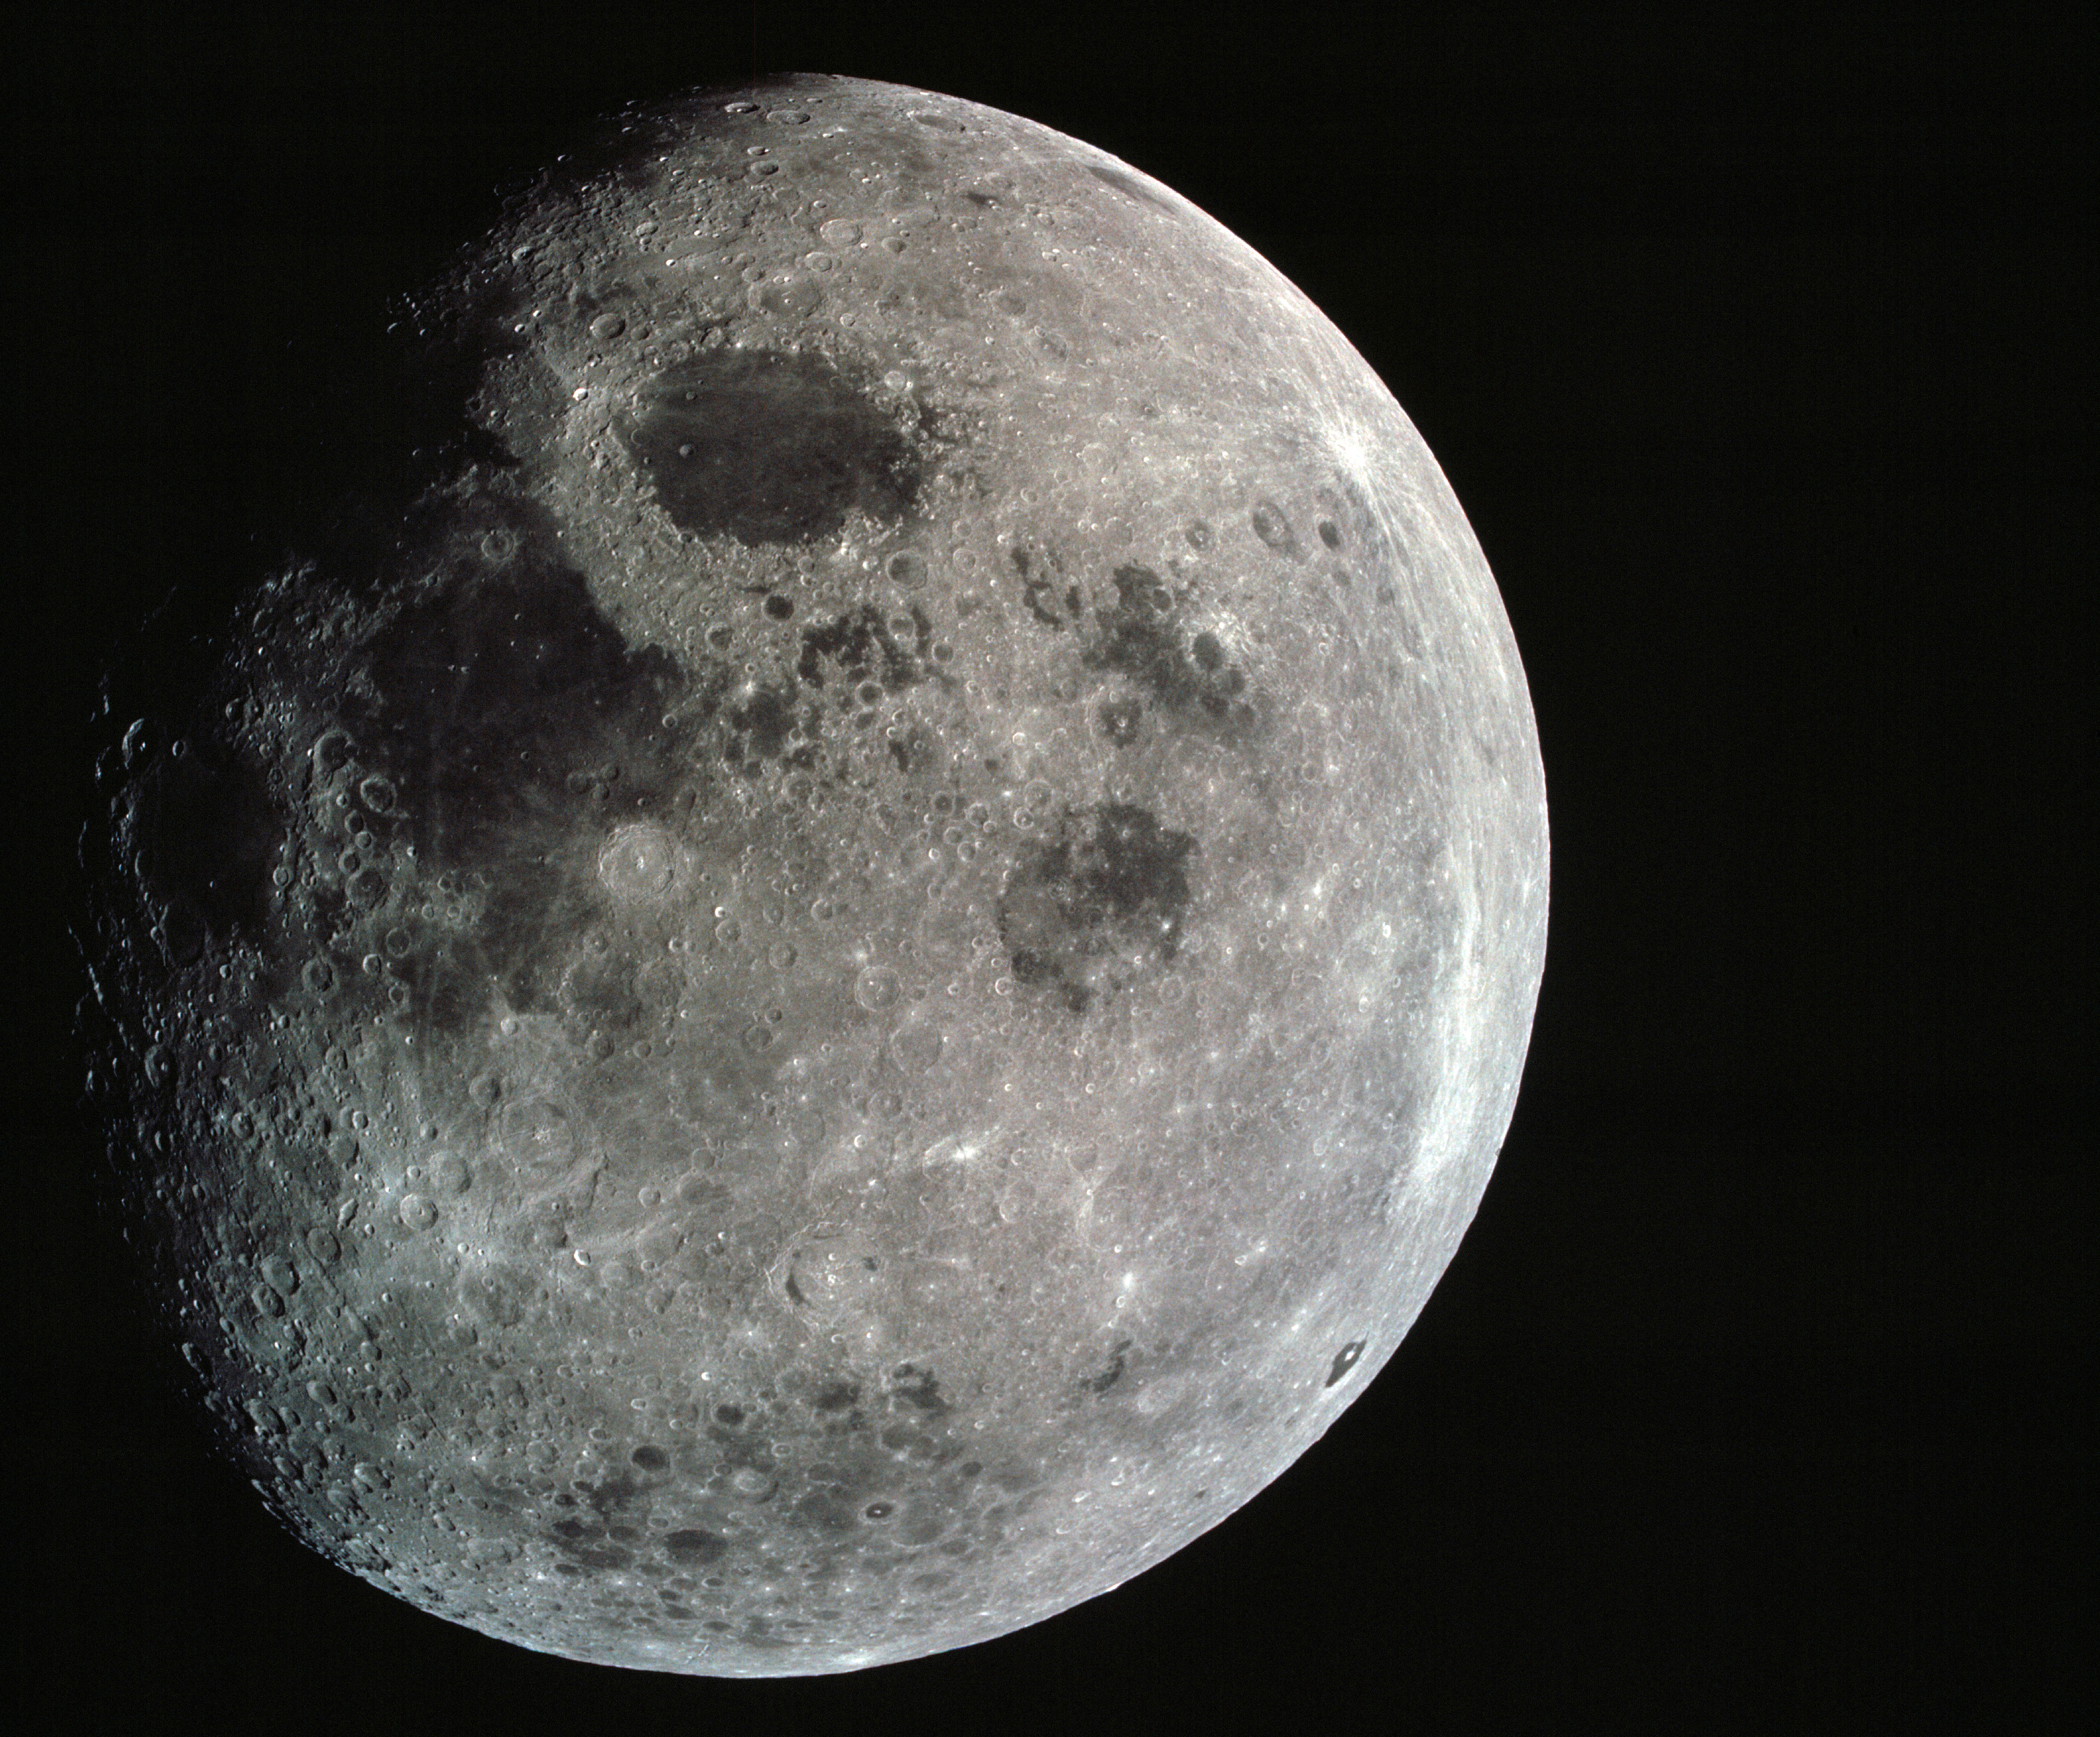 Photograph of a nearly full moon was taken from the Apollo 8 spacecraft at a point above 70 degrees east longitude. Mare Crisium, the circular, dark-colored area near the center, is near the eastern edge of the moon as viewed from Earth. Mare Nectaris is the circular mare near the terminator. The large, irregular maira are Tranquillitatis and Fecunditatis. The terminator at left side of picture crosses Mare Tranquillitatis and highlands to the south. Lunar farside features occupy most of the right half of the picture. The large, dark-colored crater Tsiolkovsky is near the limb at the lower right. Conspicuous bright rays radiate from two large craters, one to the north of Tsiolkovsky, the other near the limb in the upper half of the picture. These rayed craters were not conspicuous in Lunar Orbiter photography due to the low sun elevations when the Lunar Orbiter photography was made. The crater Langrenus is near the center of the picture at the eastern edge of Mare Fecunditatis. The lunar surface probably has less pronounced color that indicated by this print. 